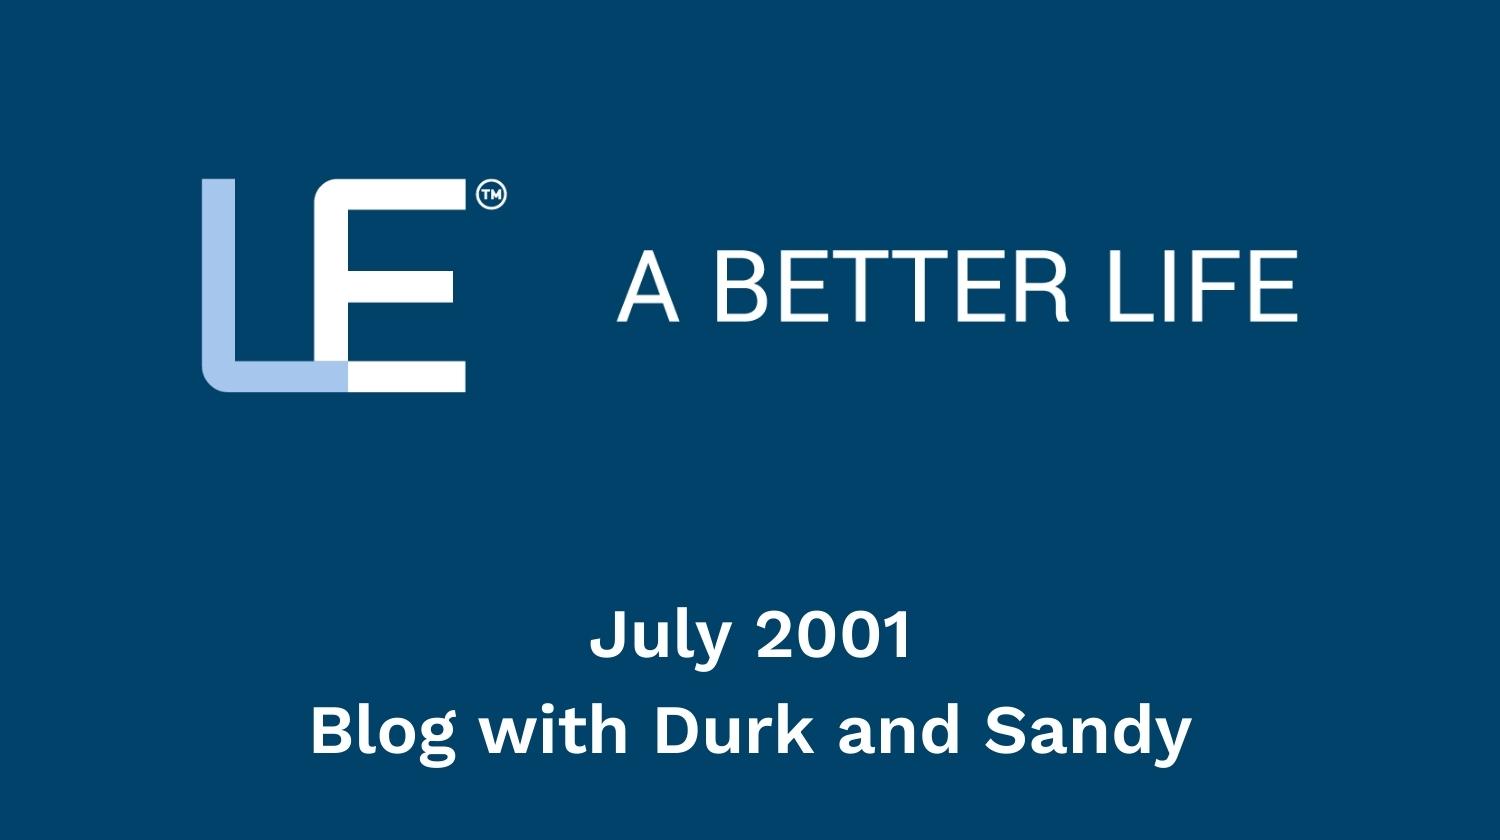 July 2001 Blog with Durk and Sandy